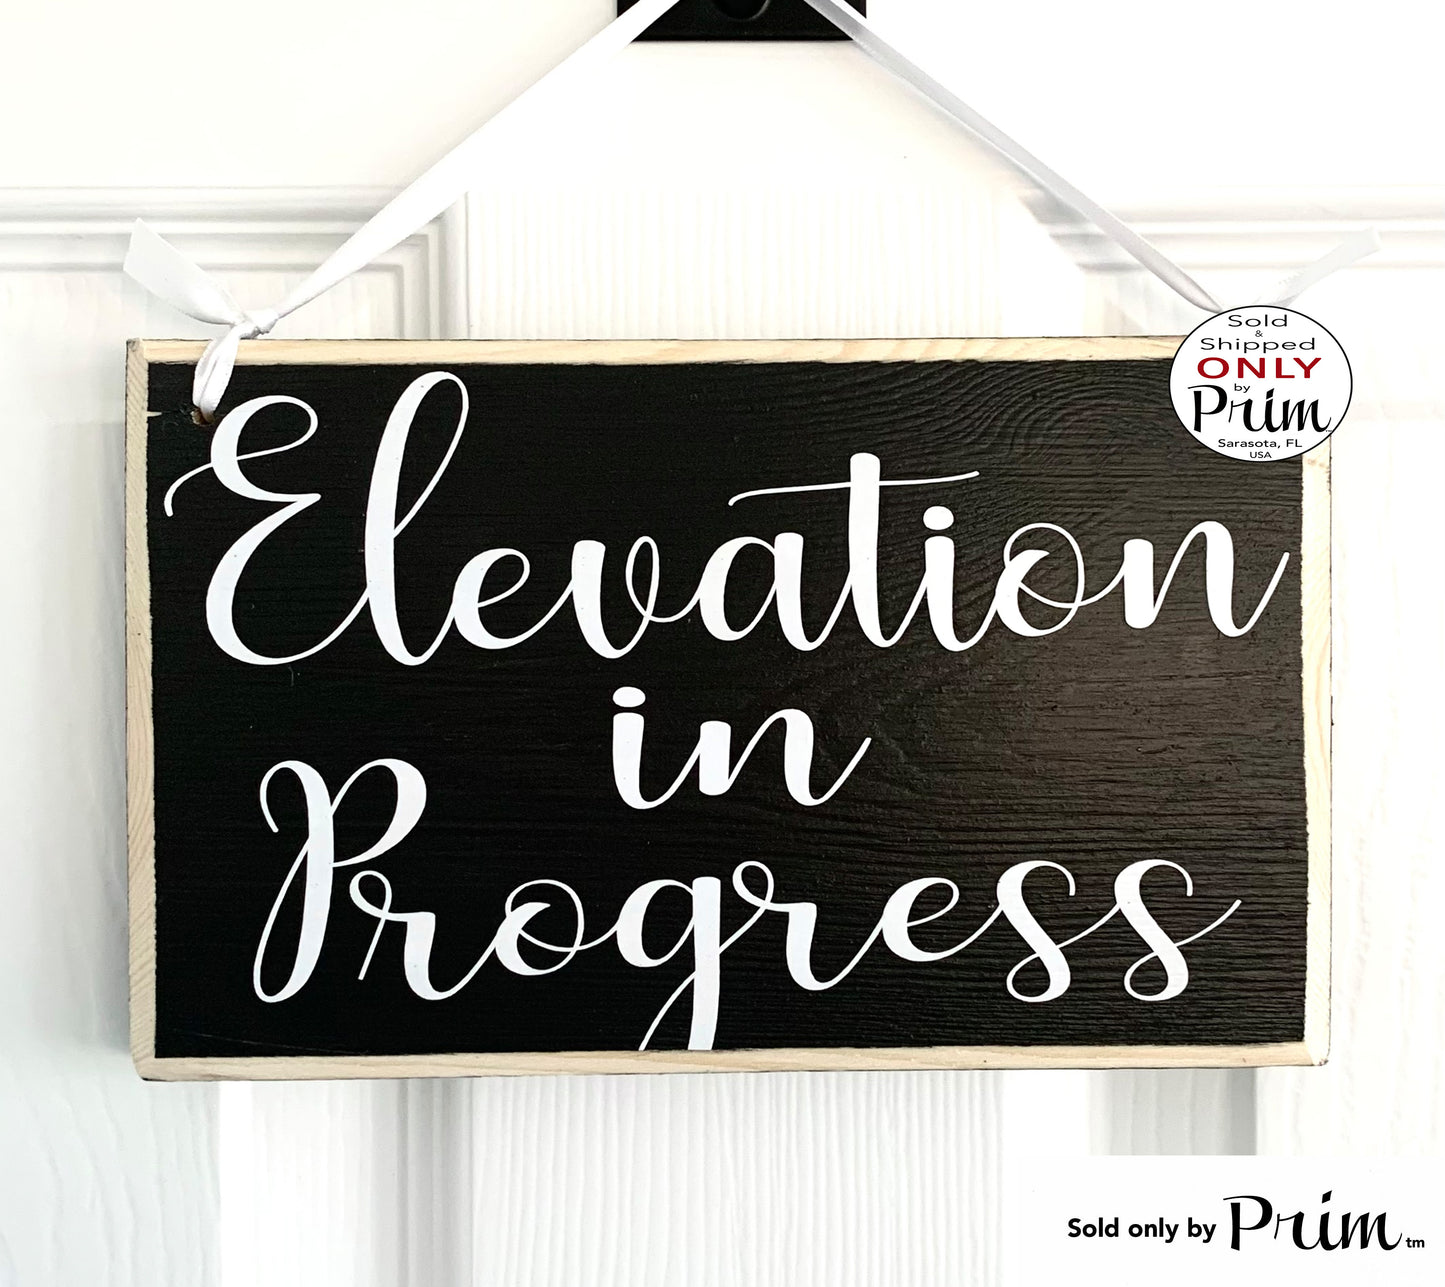 Designs by Prim 8x6 Elevation In Progress Custom Wood Sign Session Please Do Not Disturb Spa Salon Relaxation Welcome Home Office